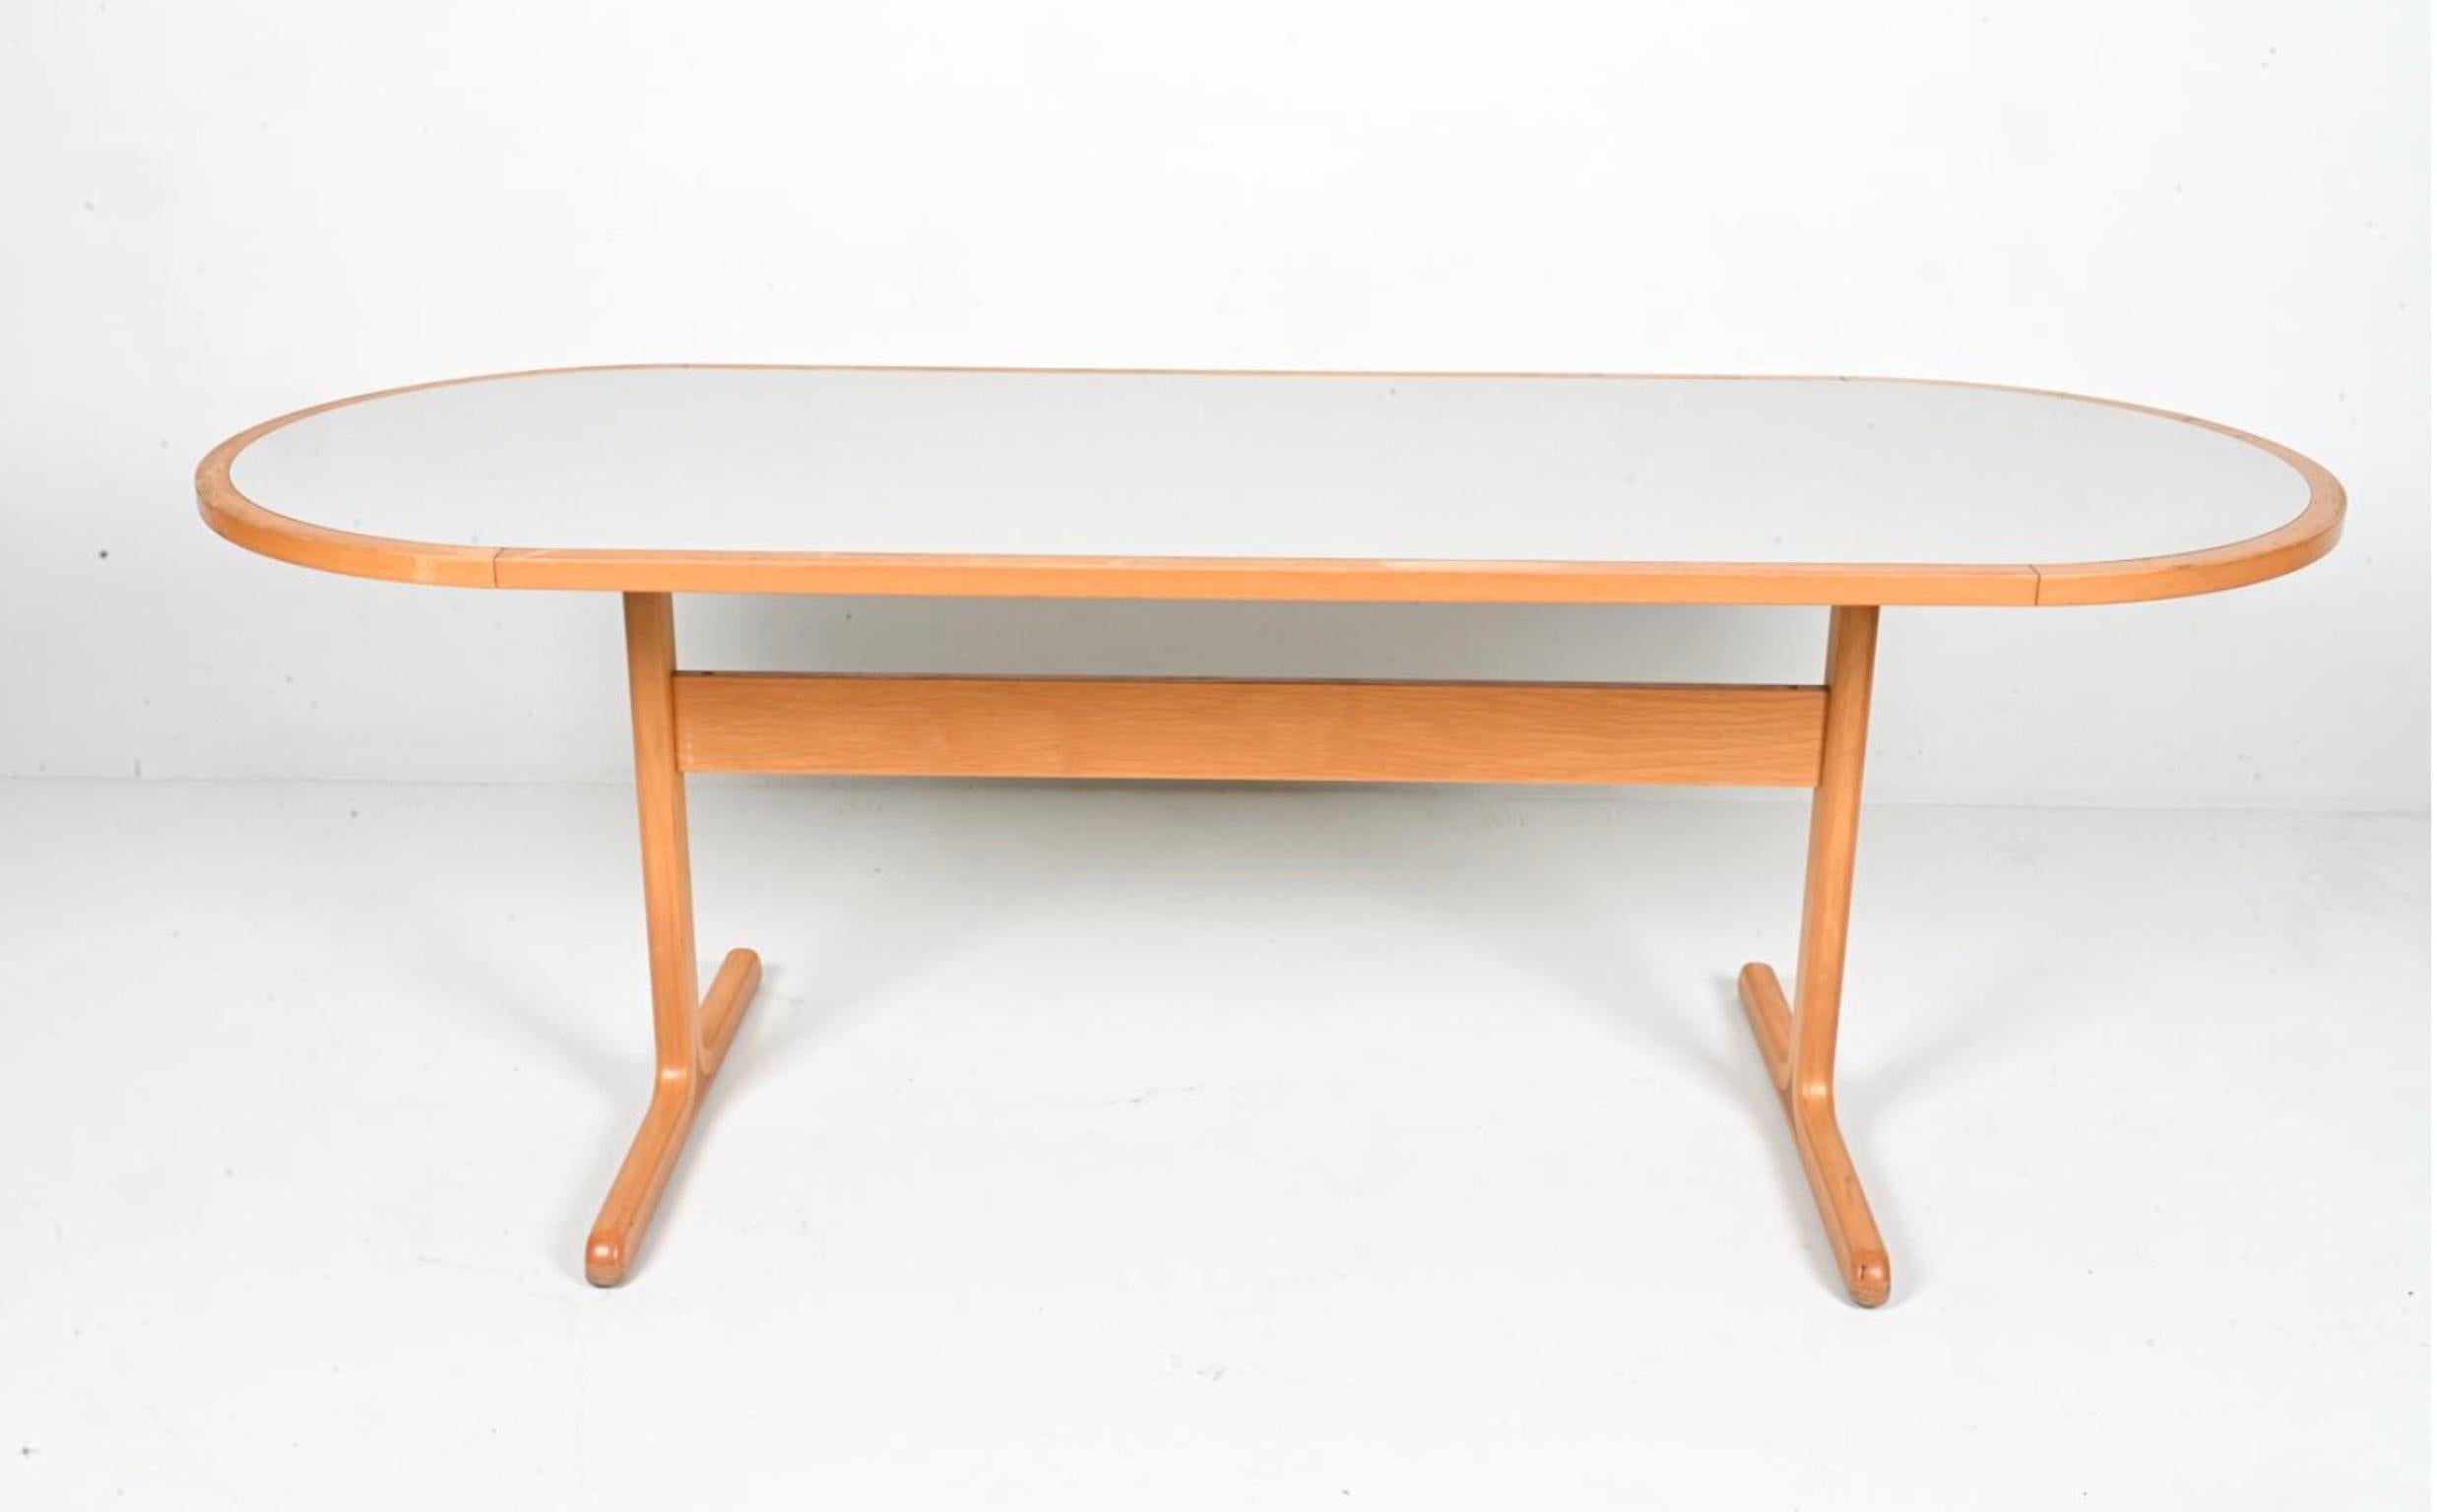 Scandinavian Modern Birch and light gray Laminate oval Racetrack Dining table with trestle legs. Designed by Rud Thygesen & Johnny Sorensen. Very simple clean design. Shows normal wear and use otherwise clean and stable. Scandinavian Modern made c.